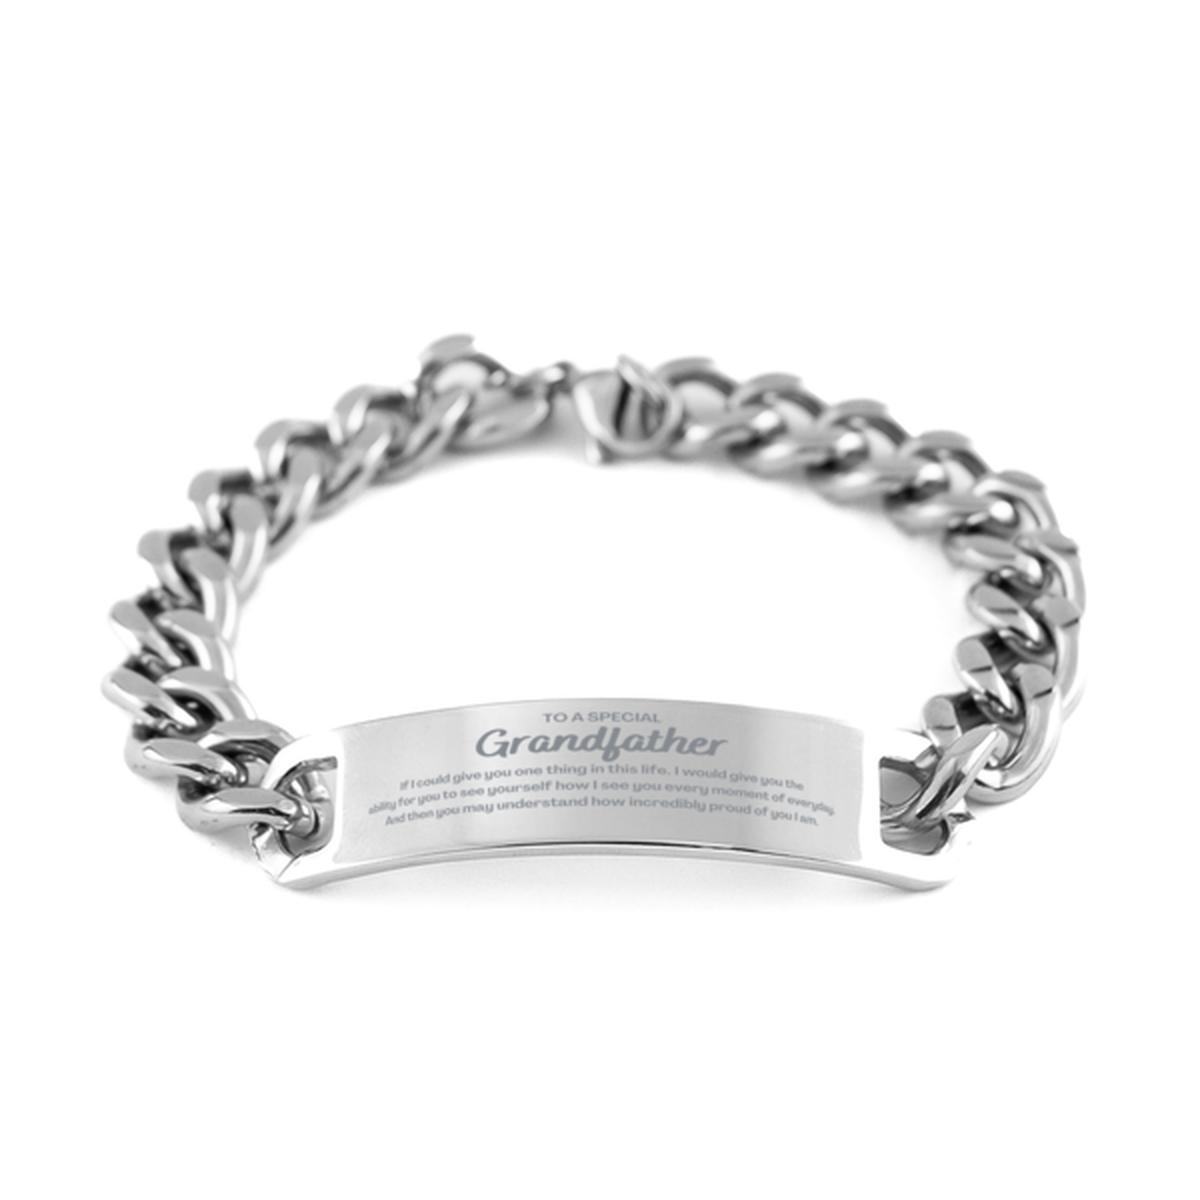 To My Grandfather Cuban Chain Stainless Steel Bracelet, Gifts For Grandfather Engraved, Inspirational Gifts for Christmas Birthday, Epic Gifts for Grandfather To A Special Grandfather how incredibly proud of you I am